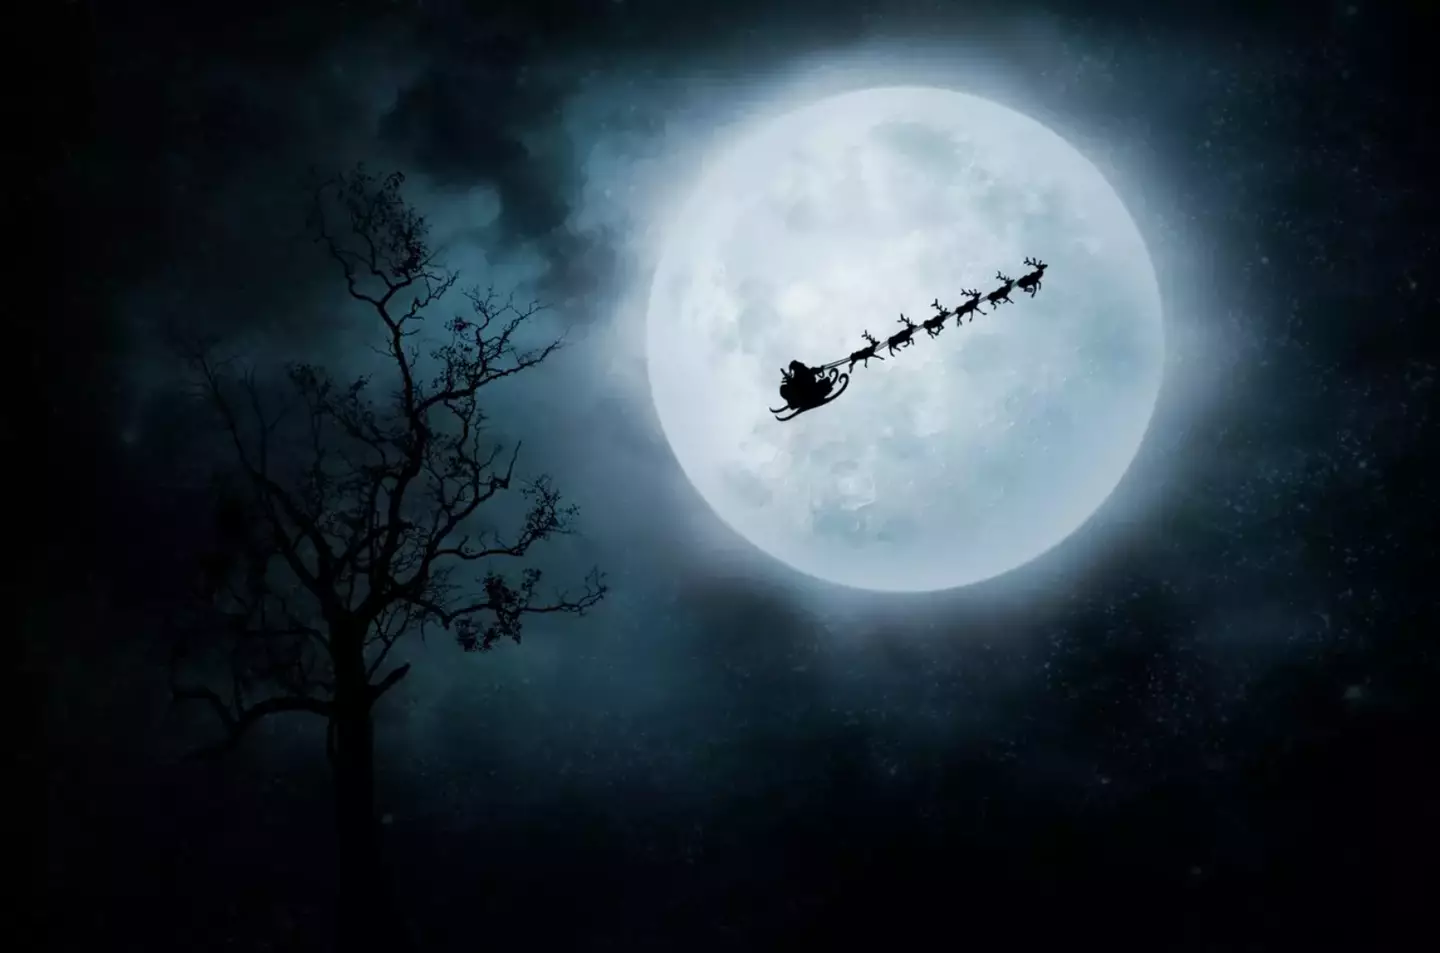 Are you tracking Santa this Christmas Eve?